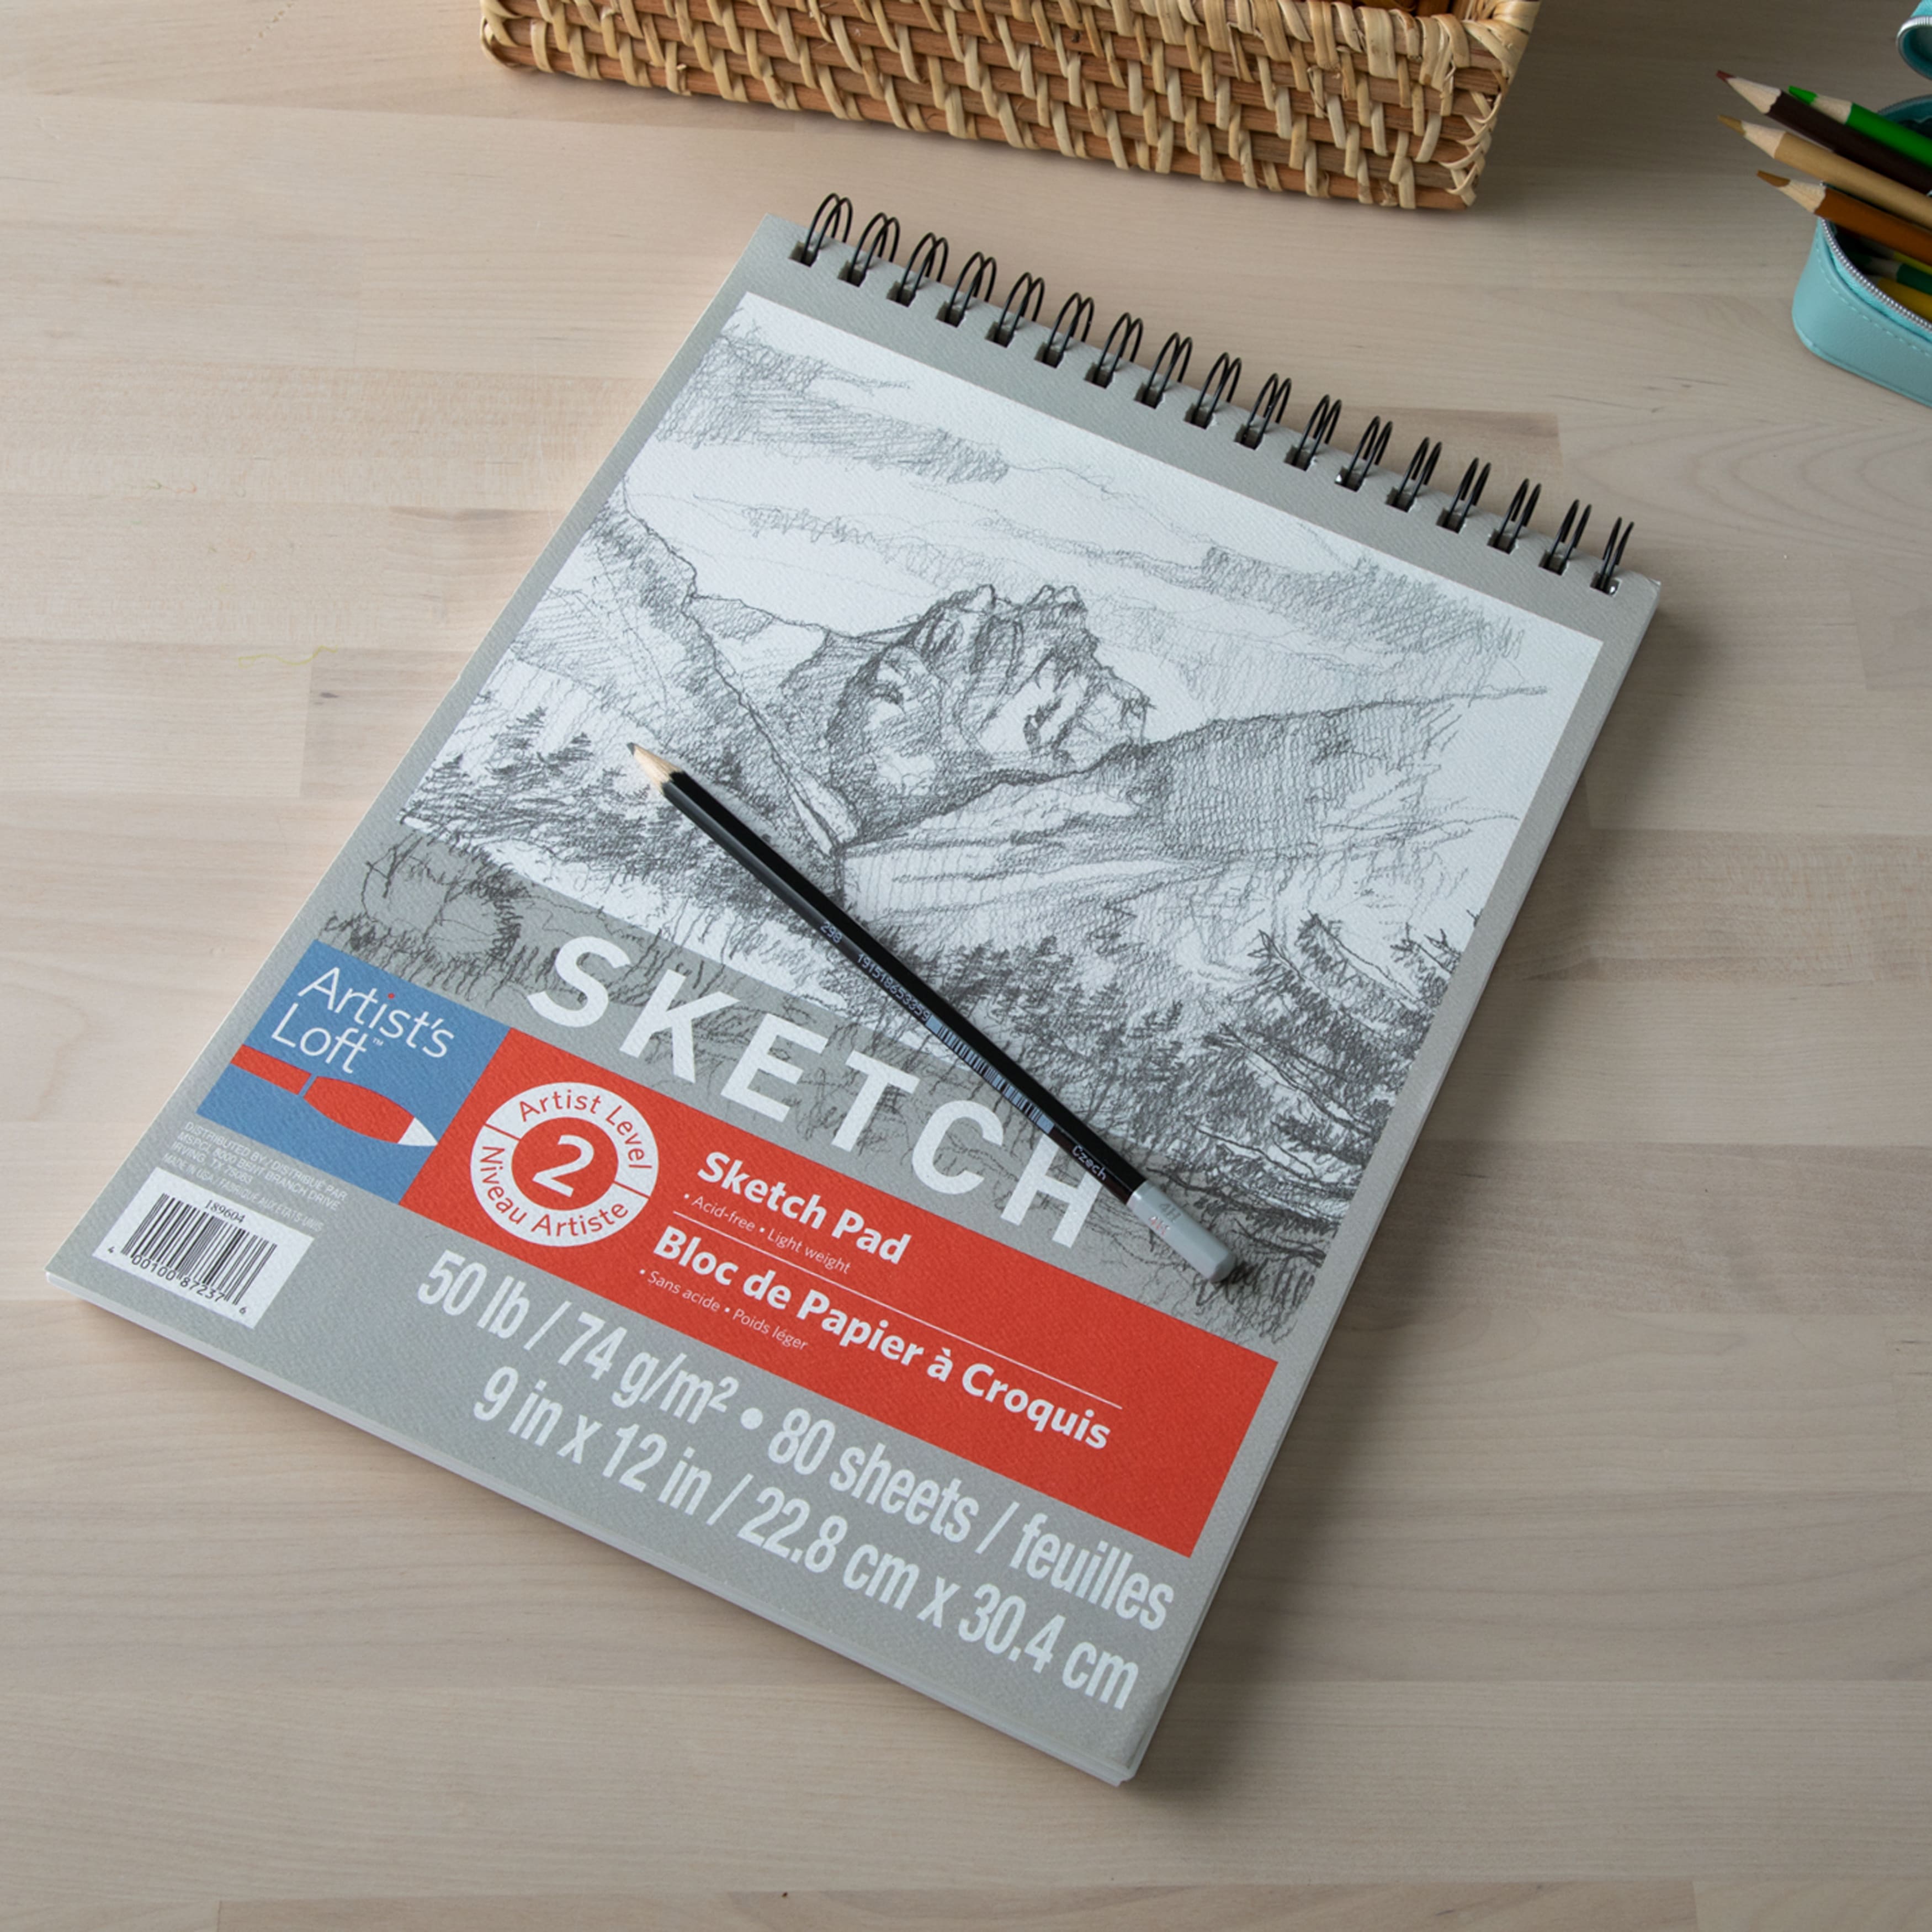 Art-n-Fly Sketch Pad  100 Sheets 9 X 12 Inch Smooth Surface